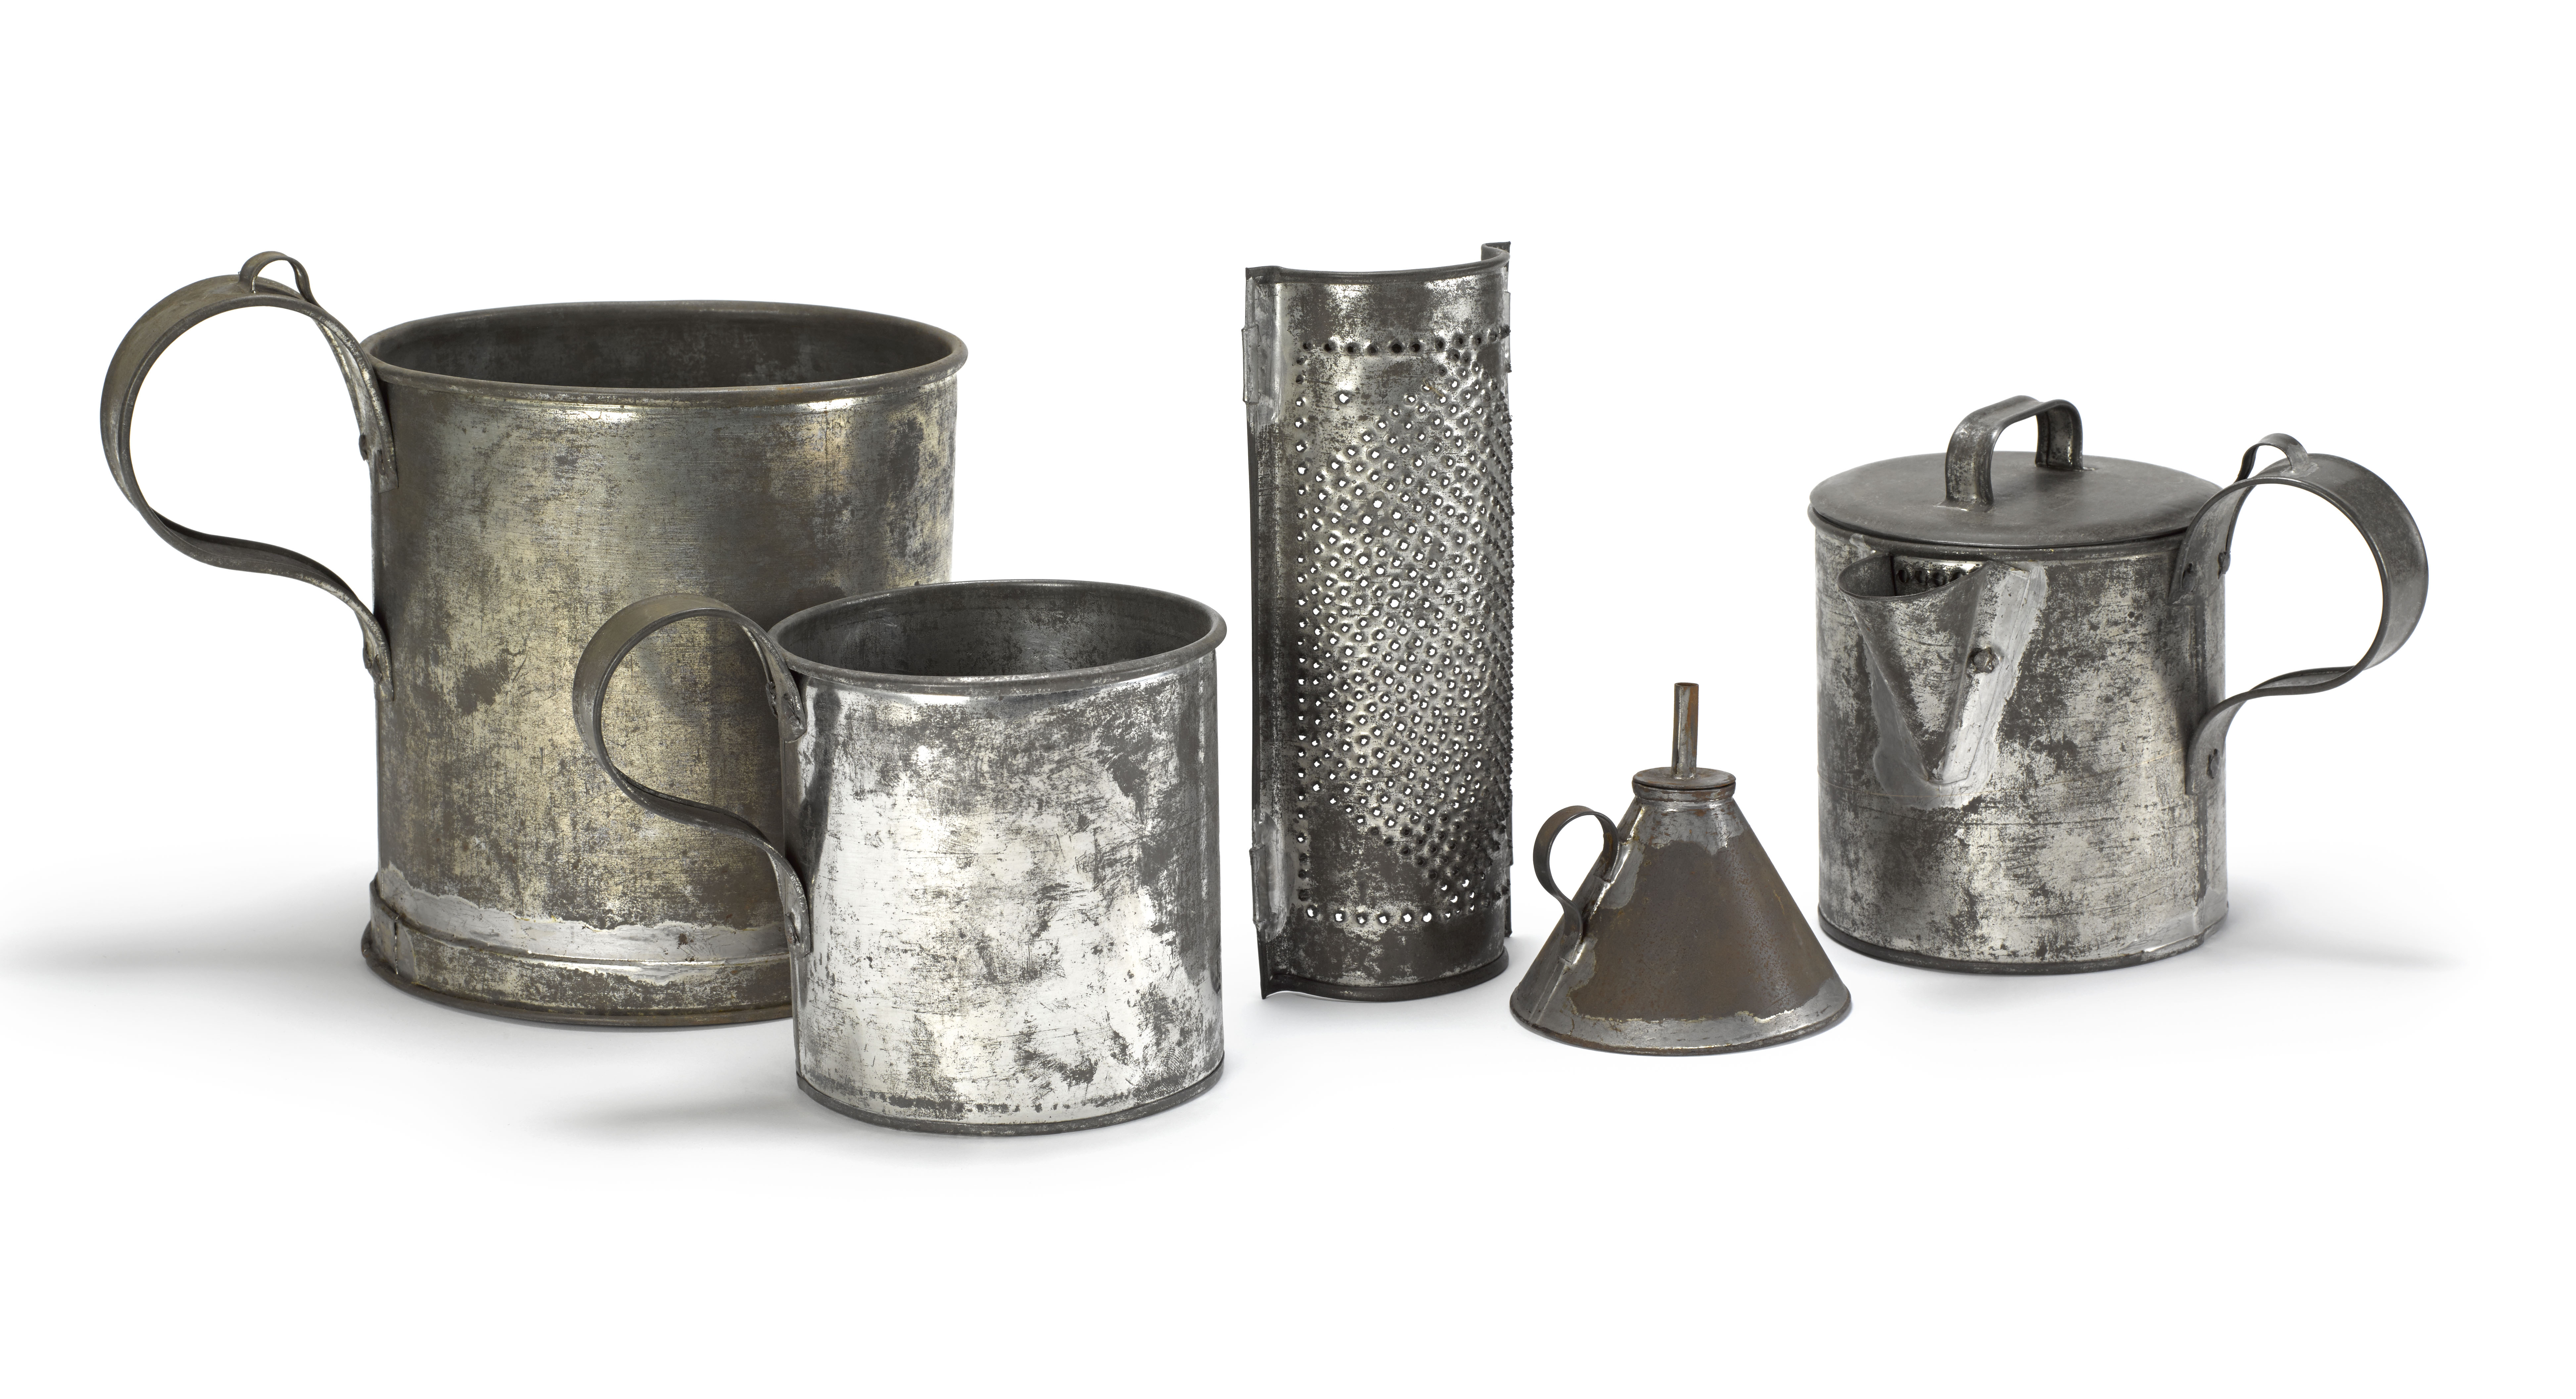 Group of tin objects | National Museum of Ireland